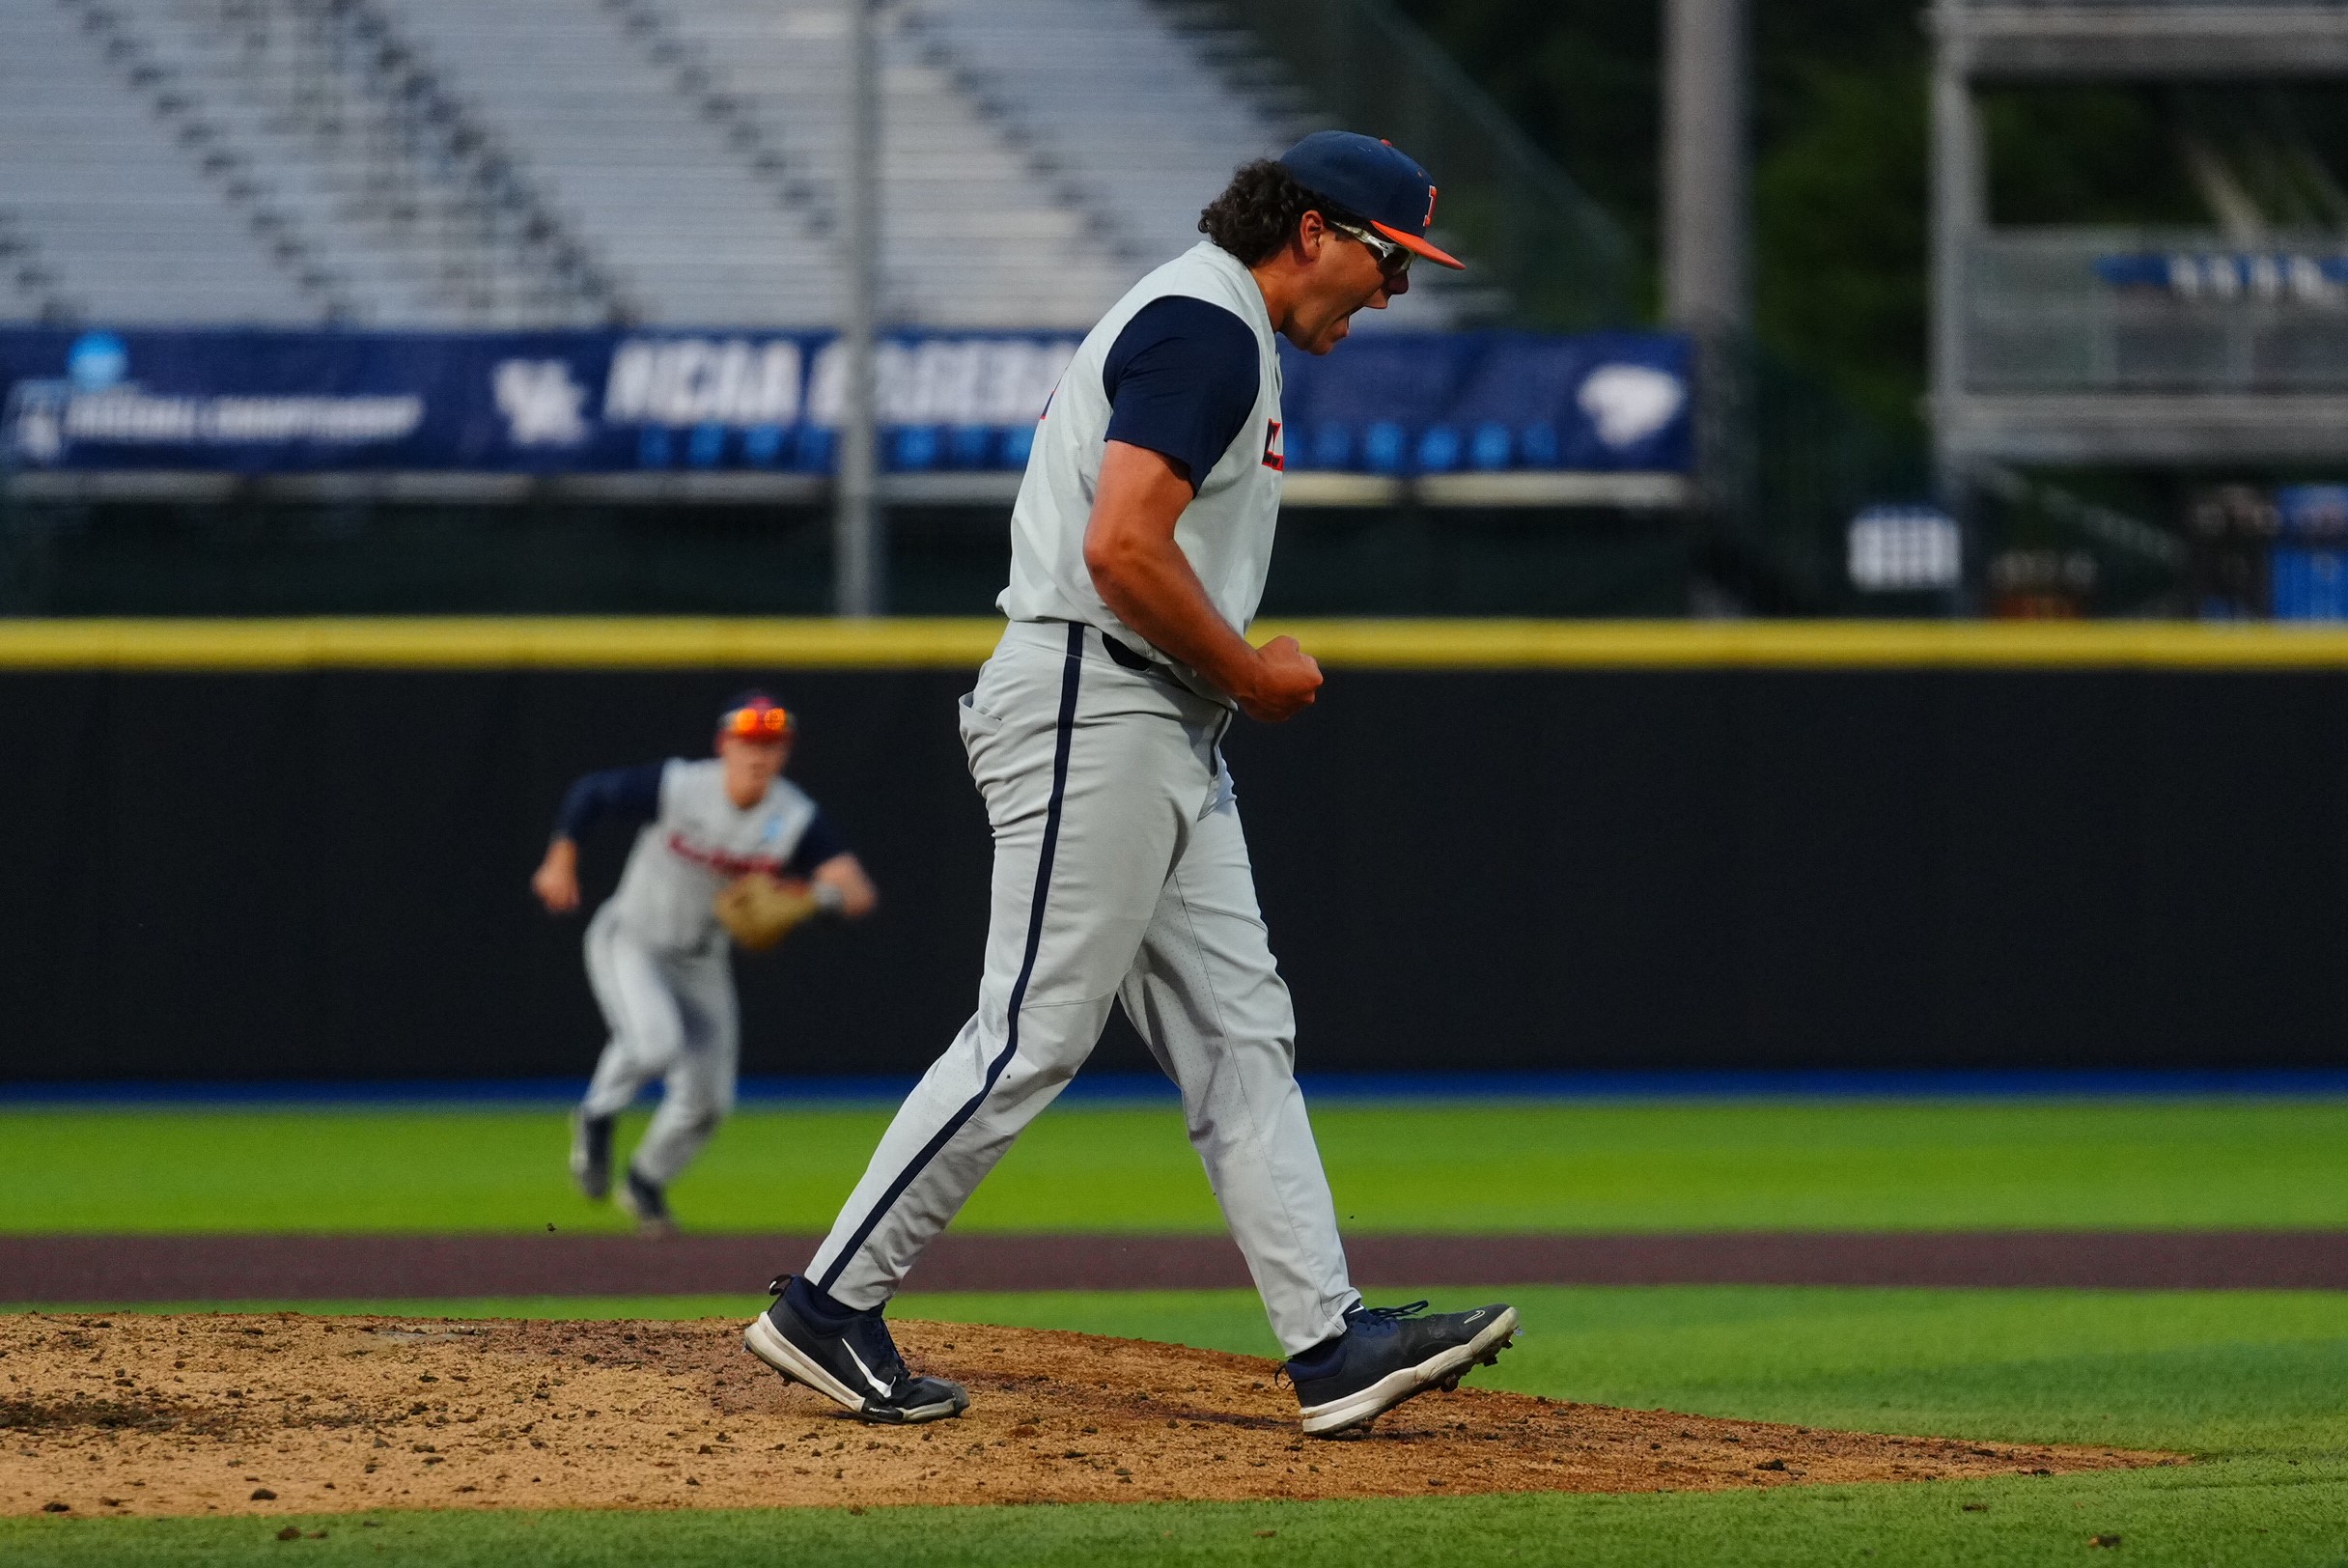 ‘He has responded’ - How Jack Crowder’s Roller Coaster Illini Career Led to His Magical NCAA Regional Moment